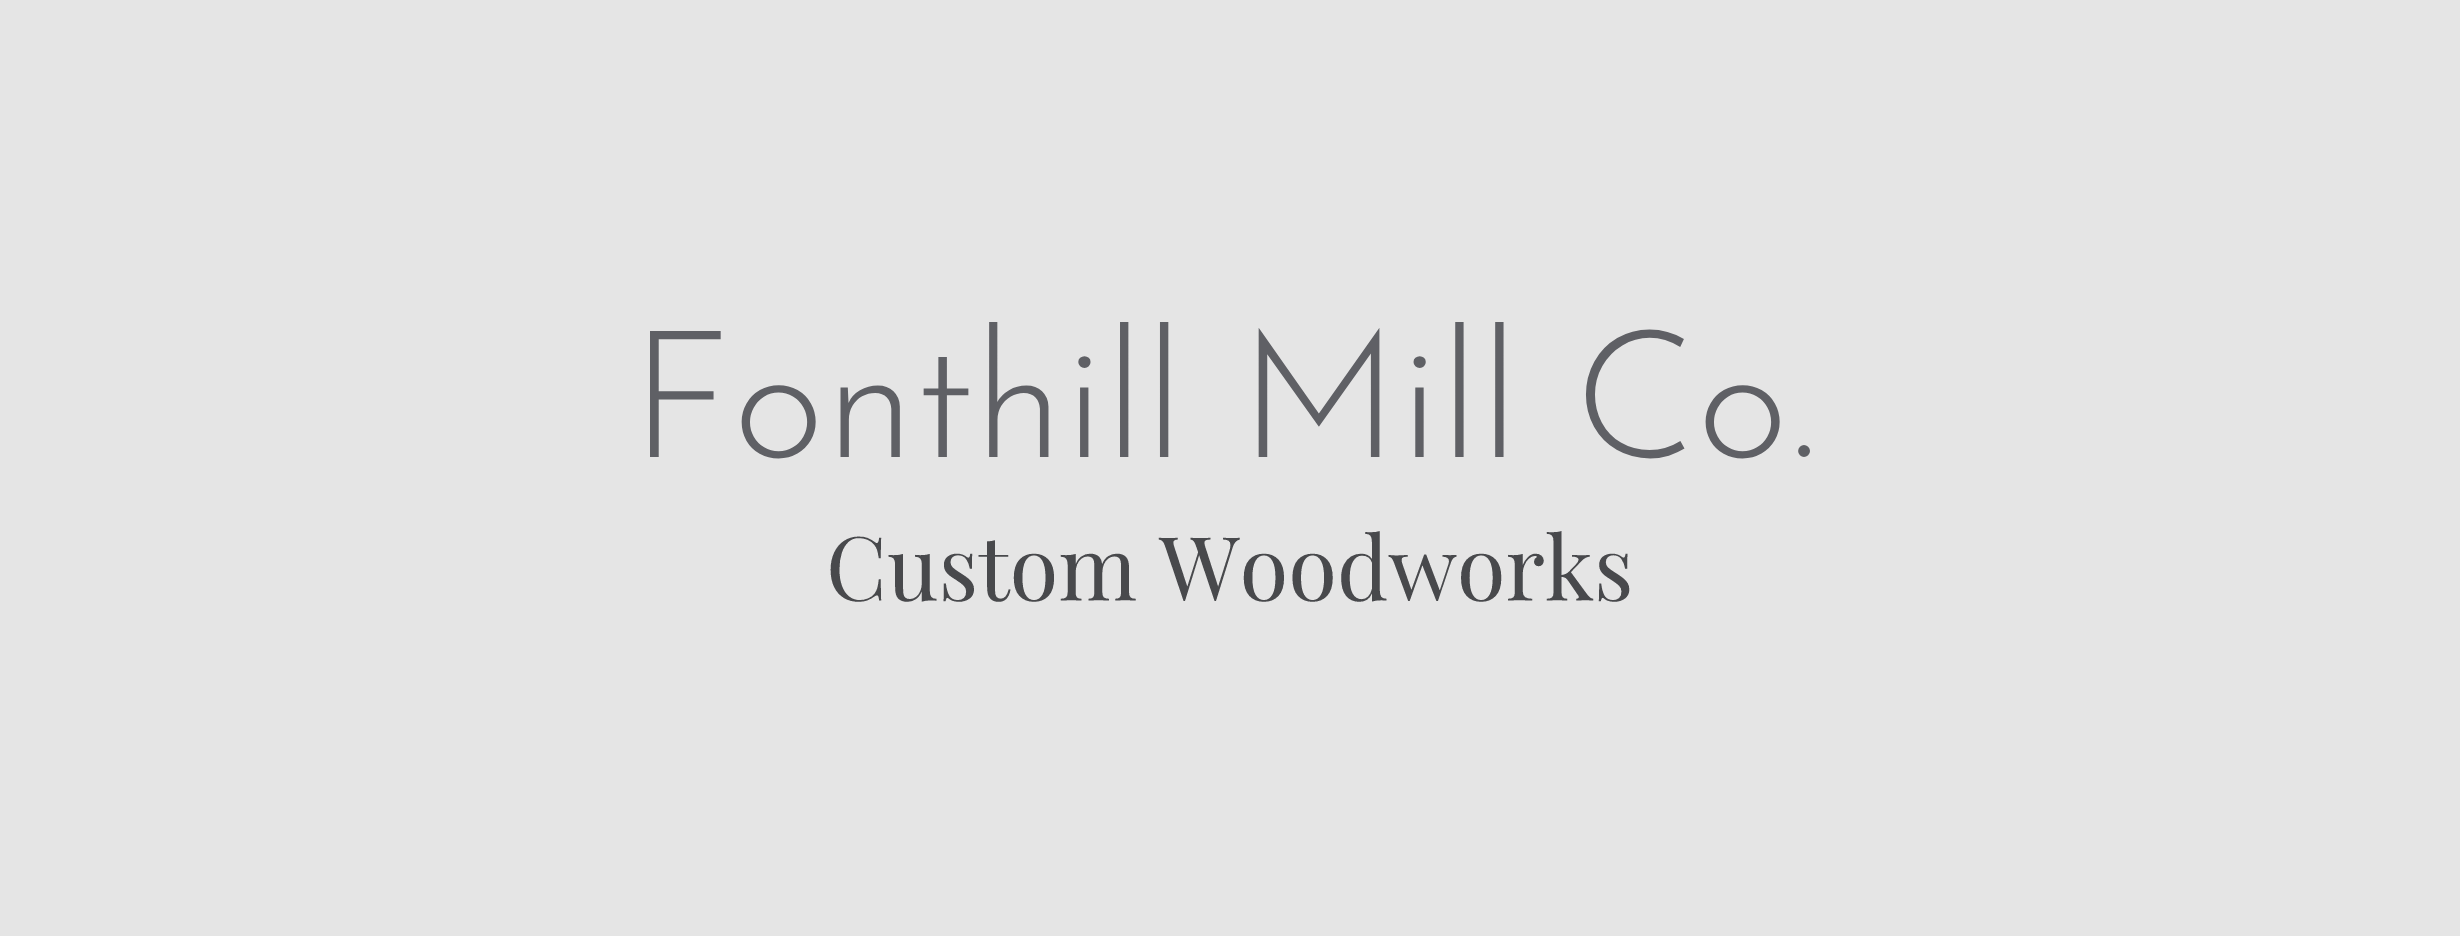 Fonthill Mill Co